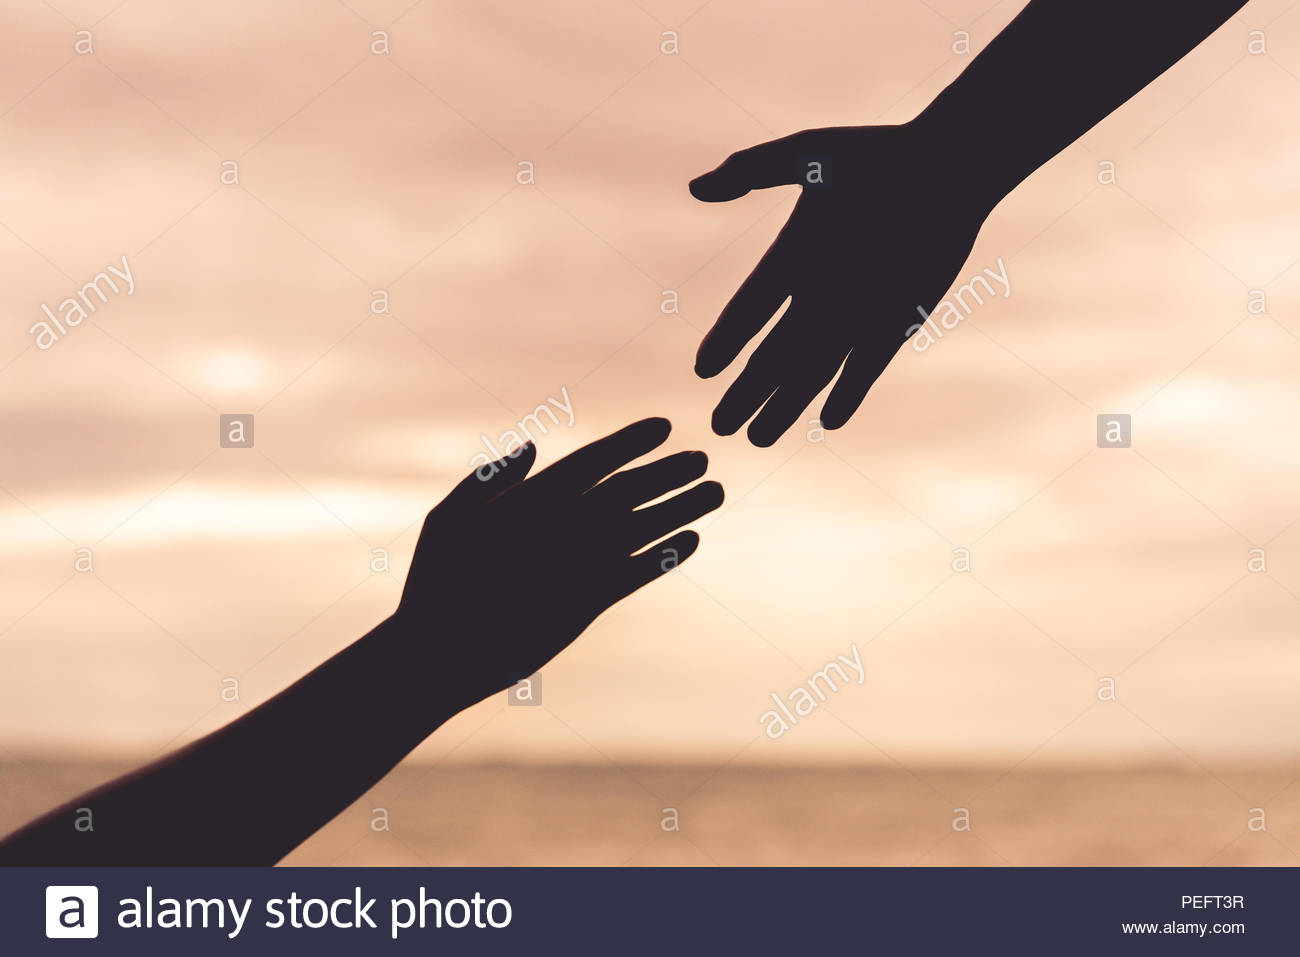 Silhouette Helping Hands On Blurred Sea And Sky Background